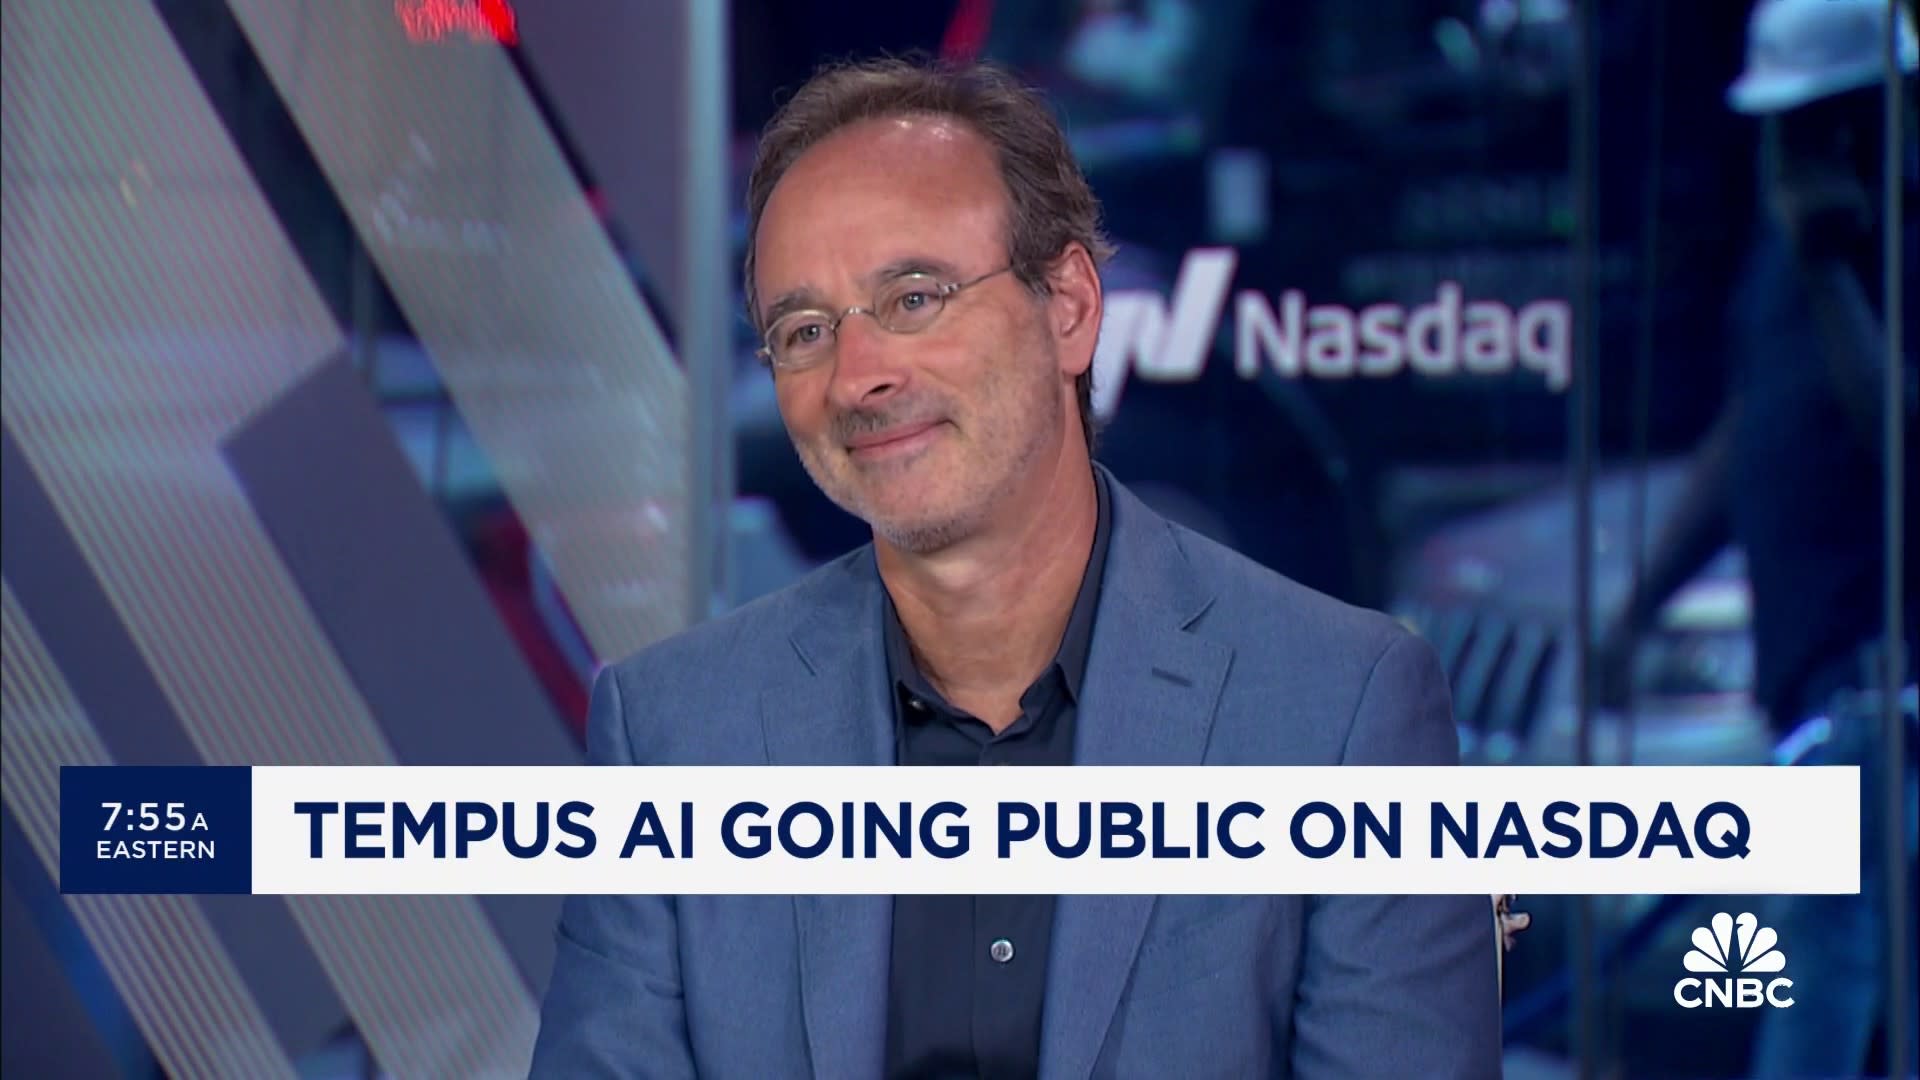 Tempus AI CEO Eric Lefkofsky on going public: It's been an incredible journey